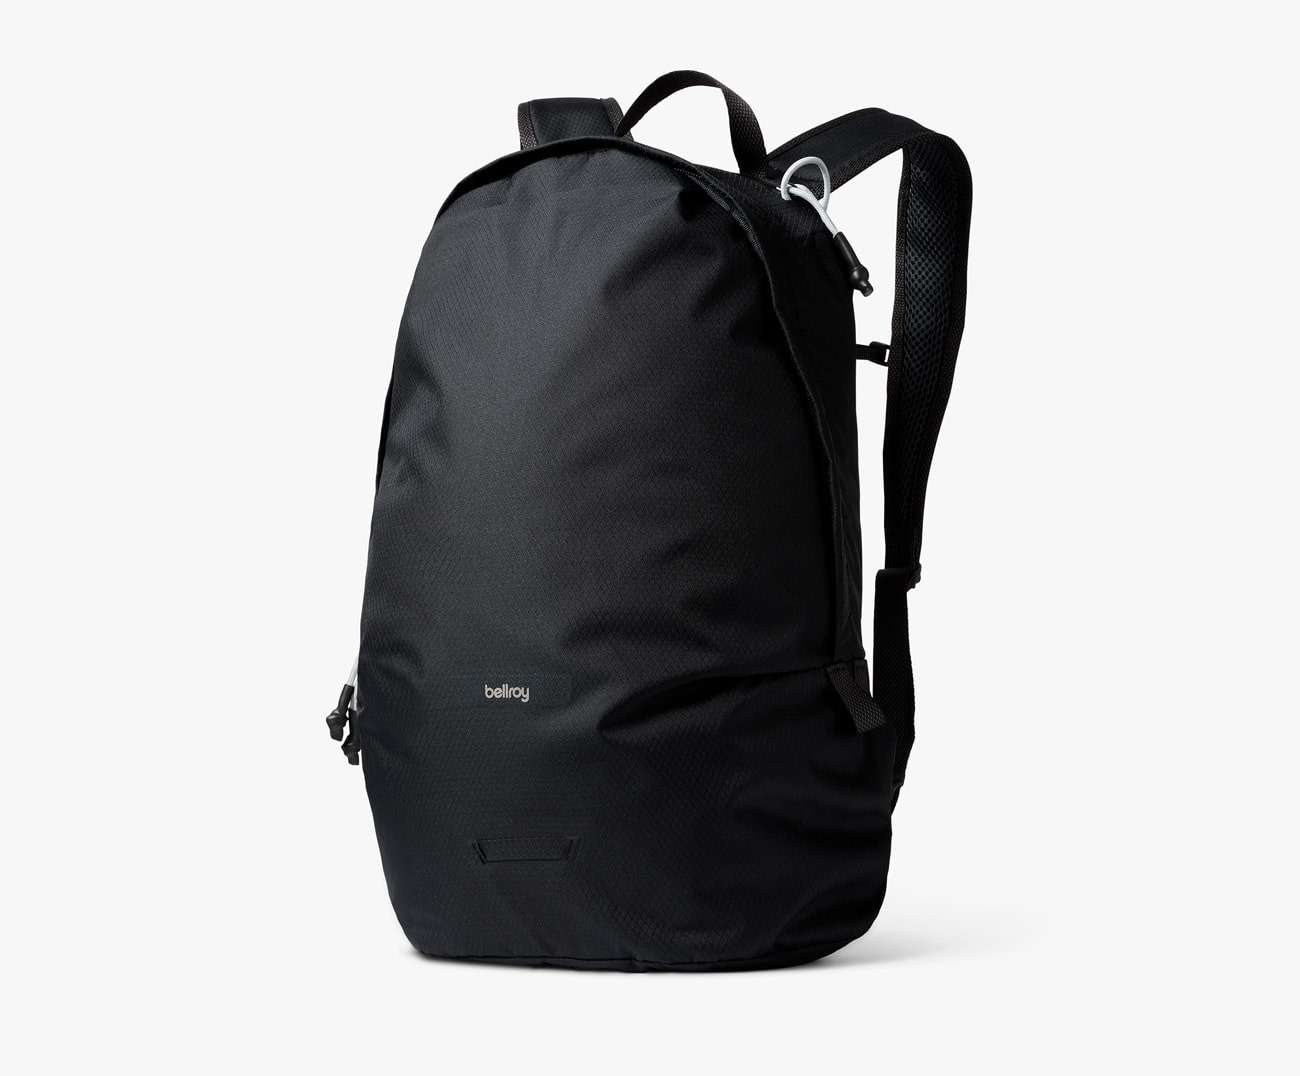 CLN - Light and durable backpack to accompany you this